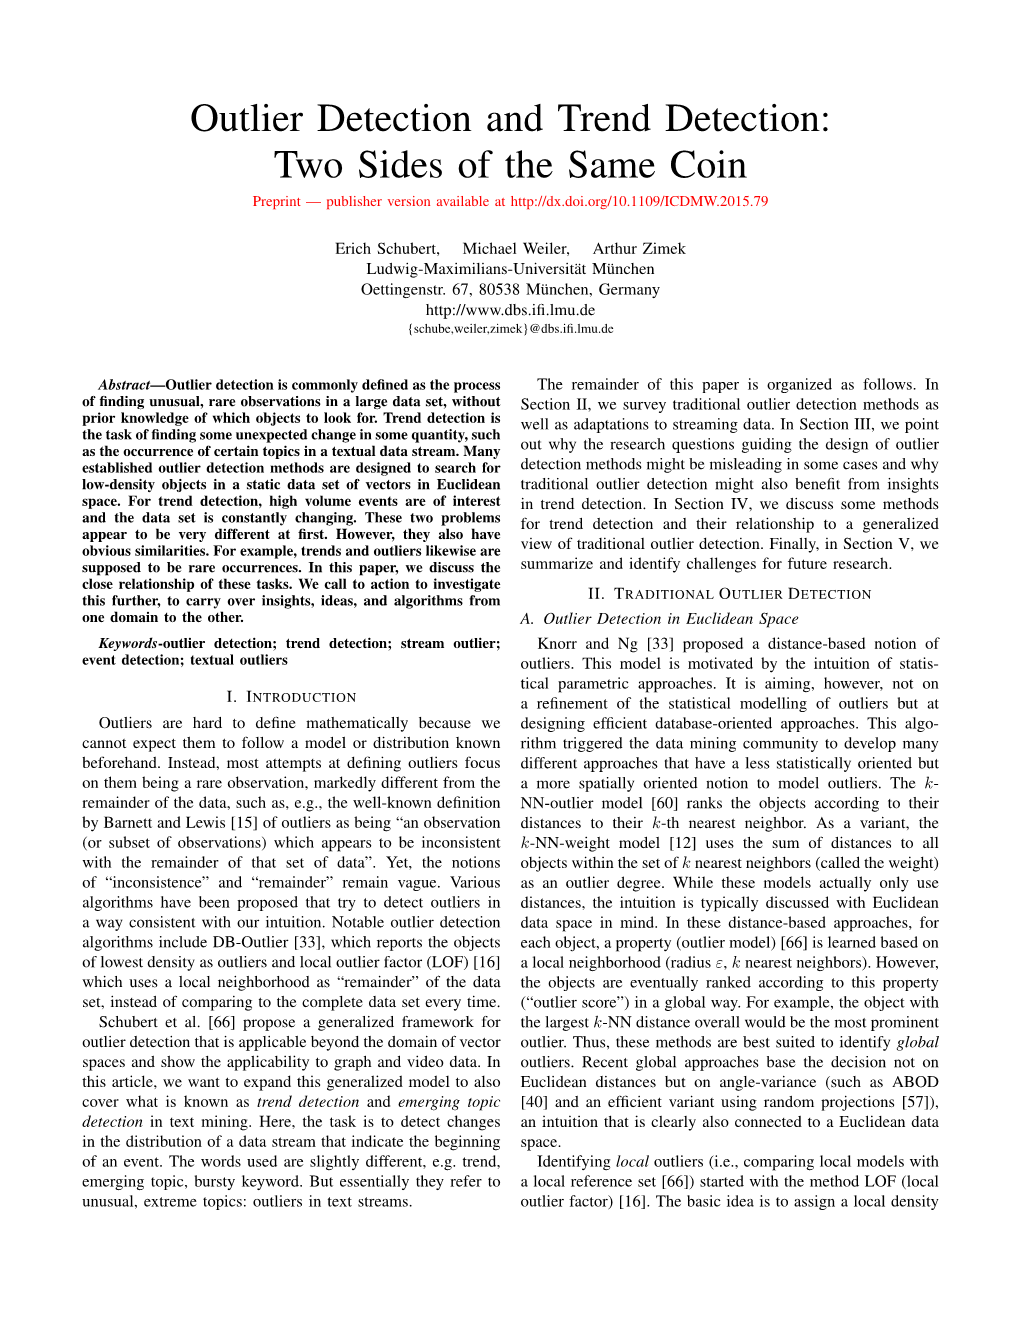 Outlier Detection and Trend Detection: Two Sides of the Same Coin Preprint — Publisher Version Available At